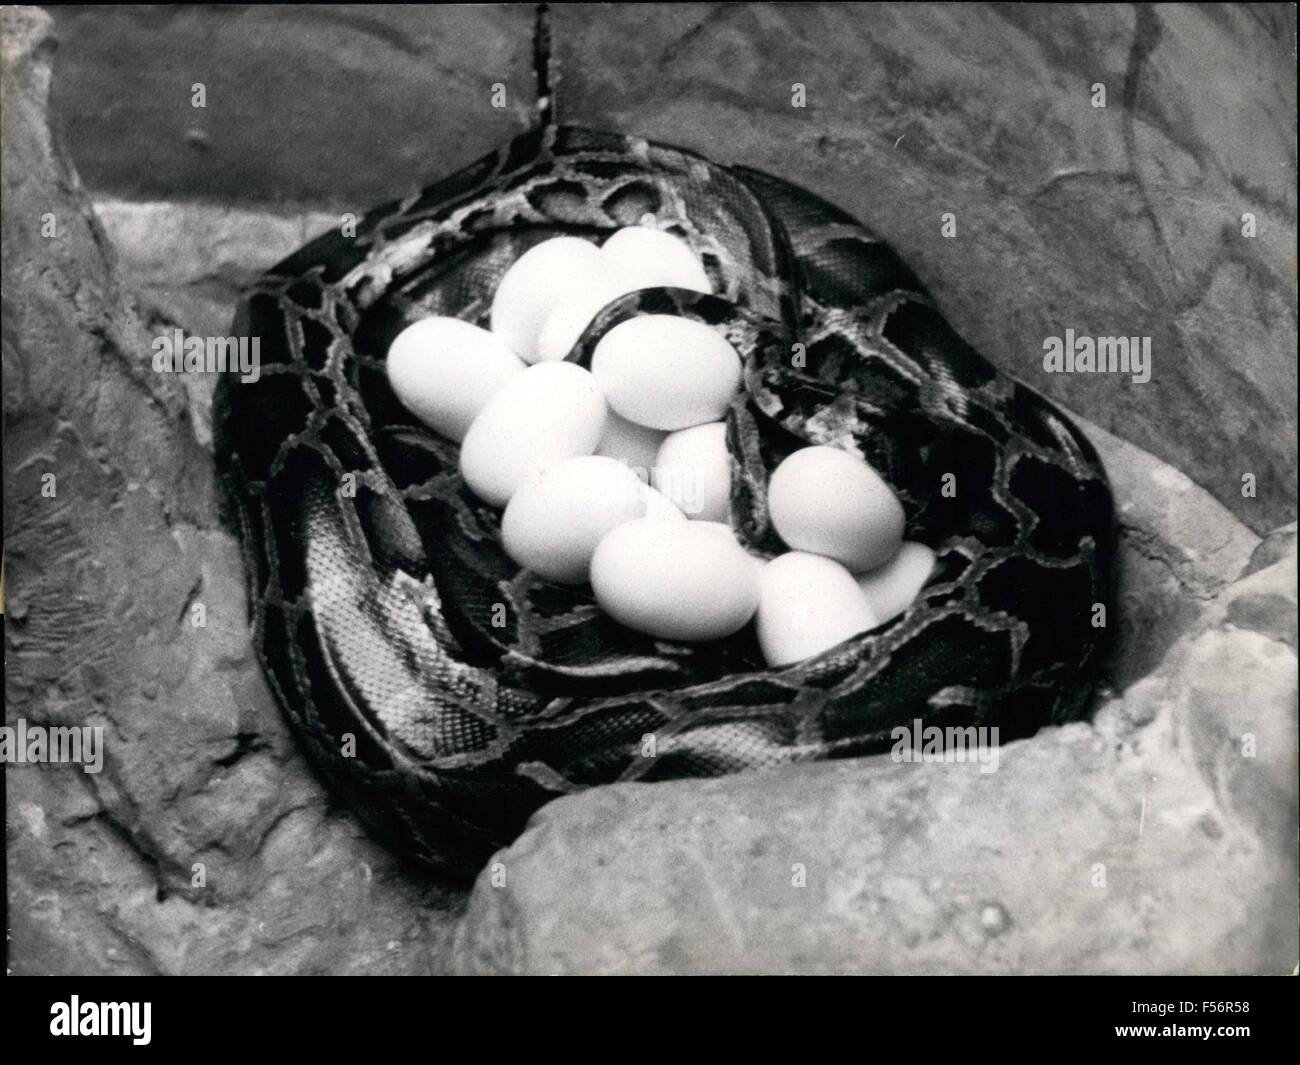 1972 - Zoological sensationa: Giant serpent hatching eggs: For the first time since 20 years a giant serpent laid eggs in a German zoo. This extraordinary fact occurred at Munich zoo Ilellabrunn in the night from Thursday to Friday (10.3./11.3). The dark spotted rock-snake, 31/2 meter lond, laid 30 eggs which it is going to sit upon for 3 months (picture). Then the managers of the zoo hope there will be 50-75 cm long baby spotted rock-snakes coming out of the eggs. The snakes had ''married'' during Carneval. © Keystone Pictures USA/ZUMAPRESS.com/Alamy Live News Stock Photo